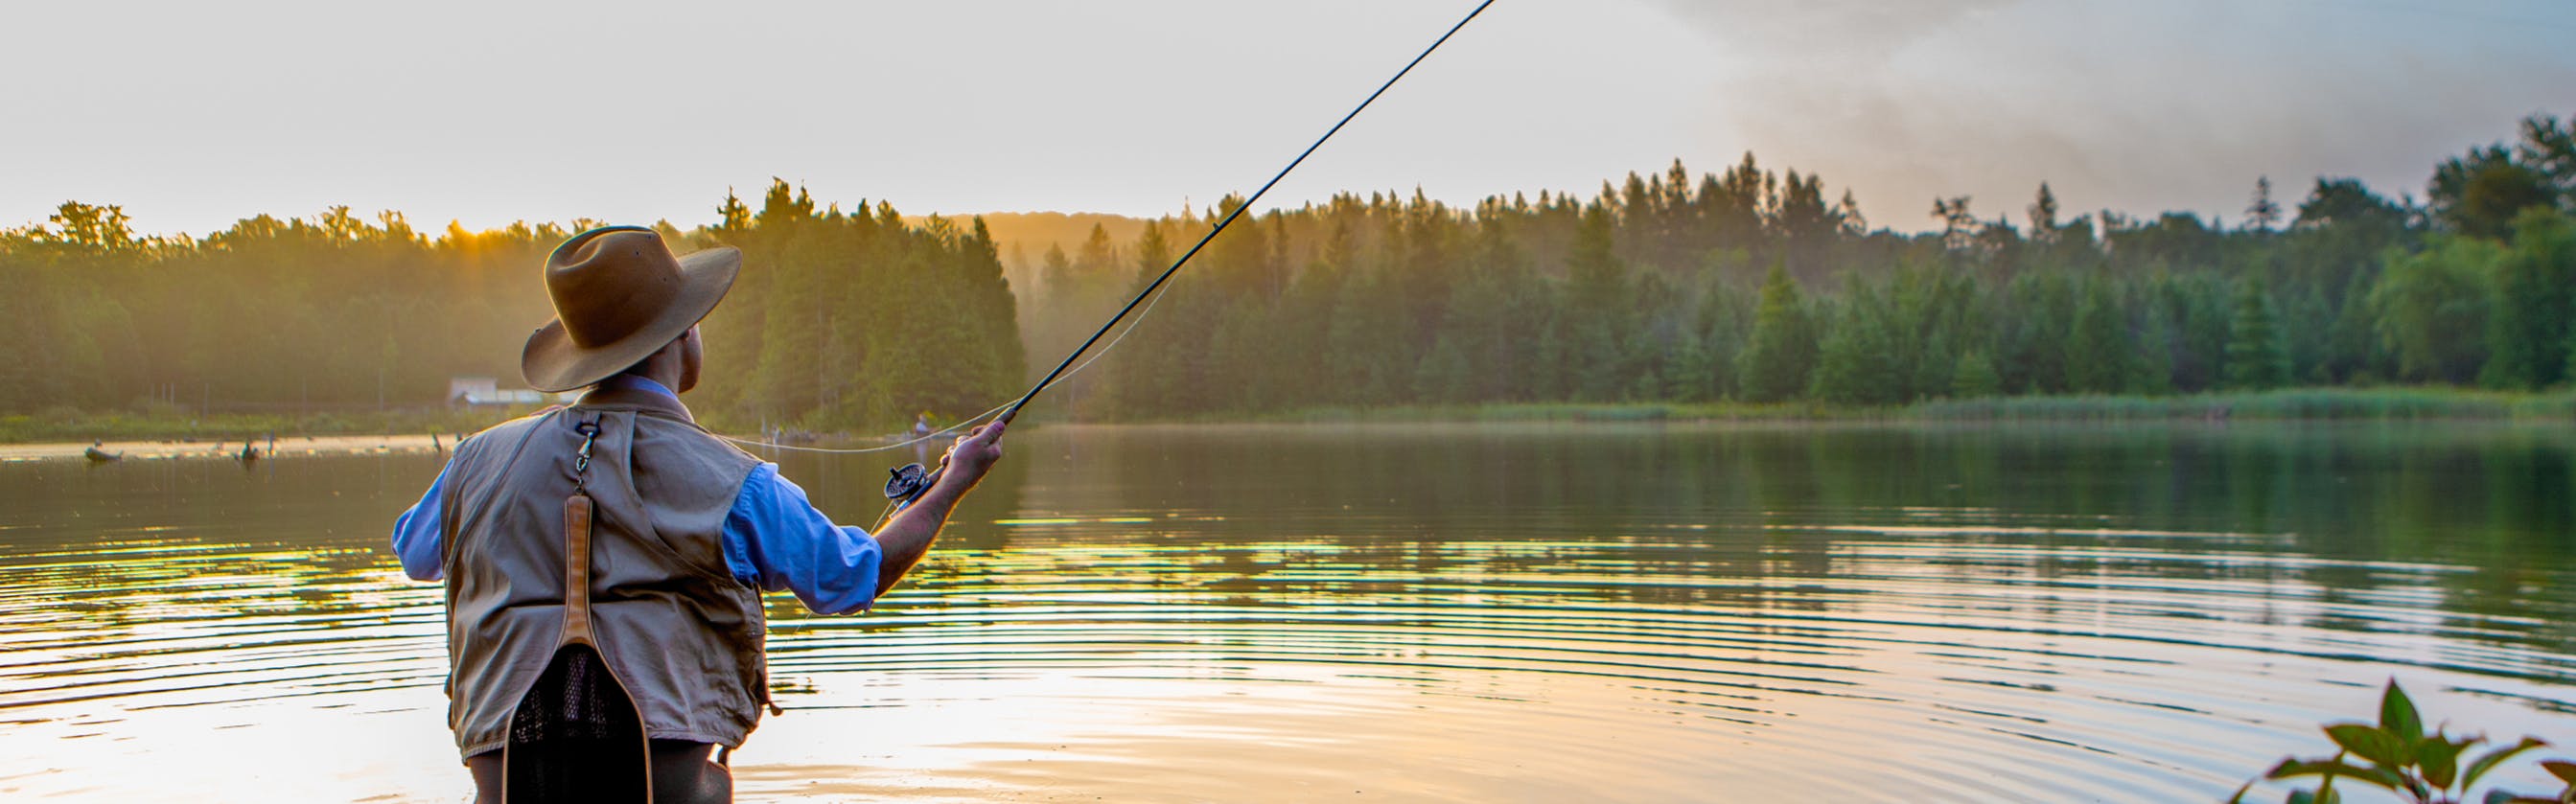 An Expert Guide to the 10 Best Fly Fishing Destinations in the